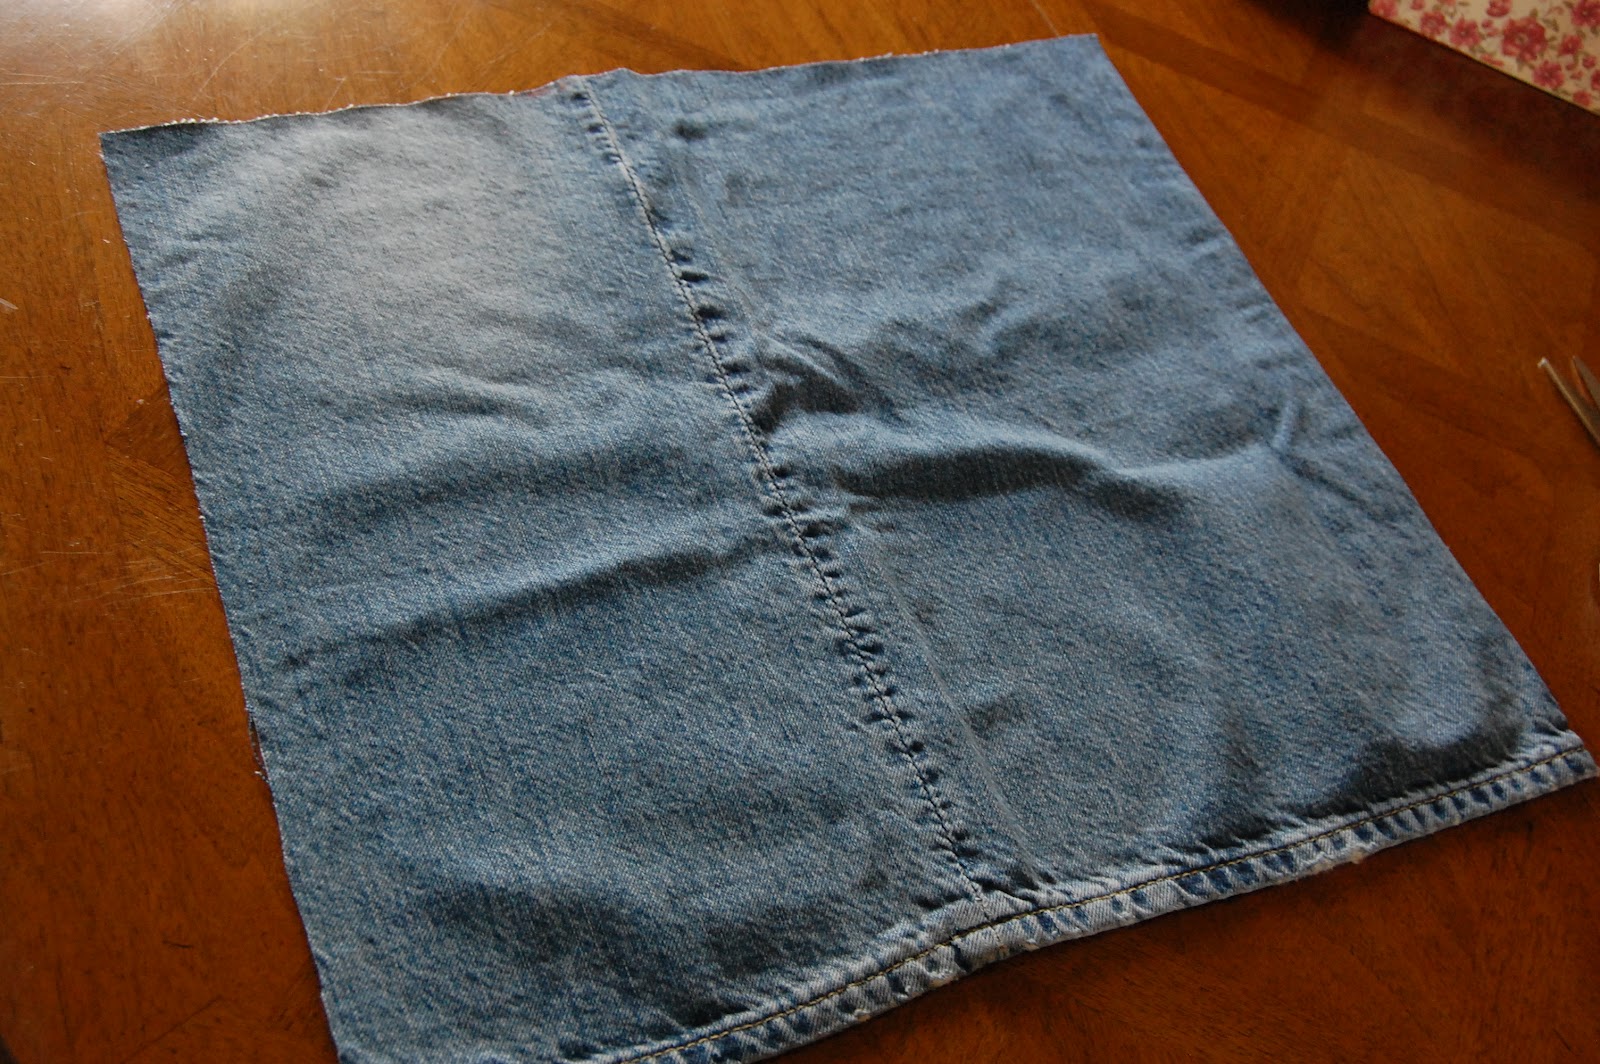 Ph.D., (Home) Economics: Refashion Tutorial: Apron from Jeans and a Top